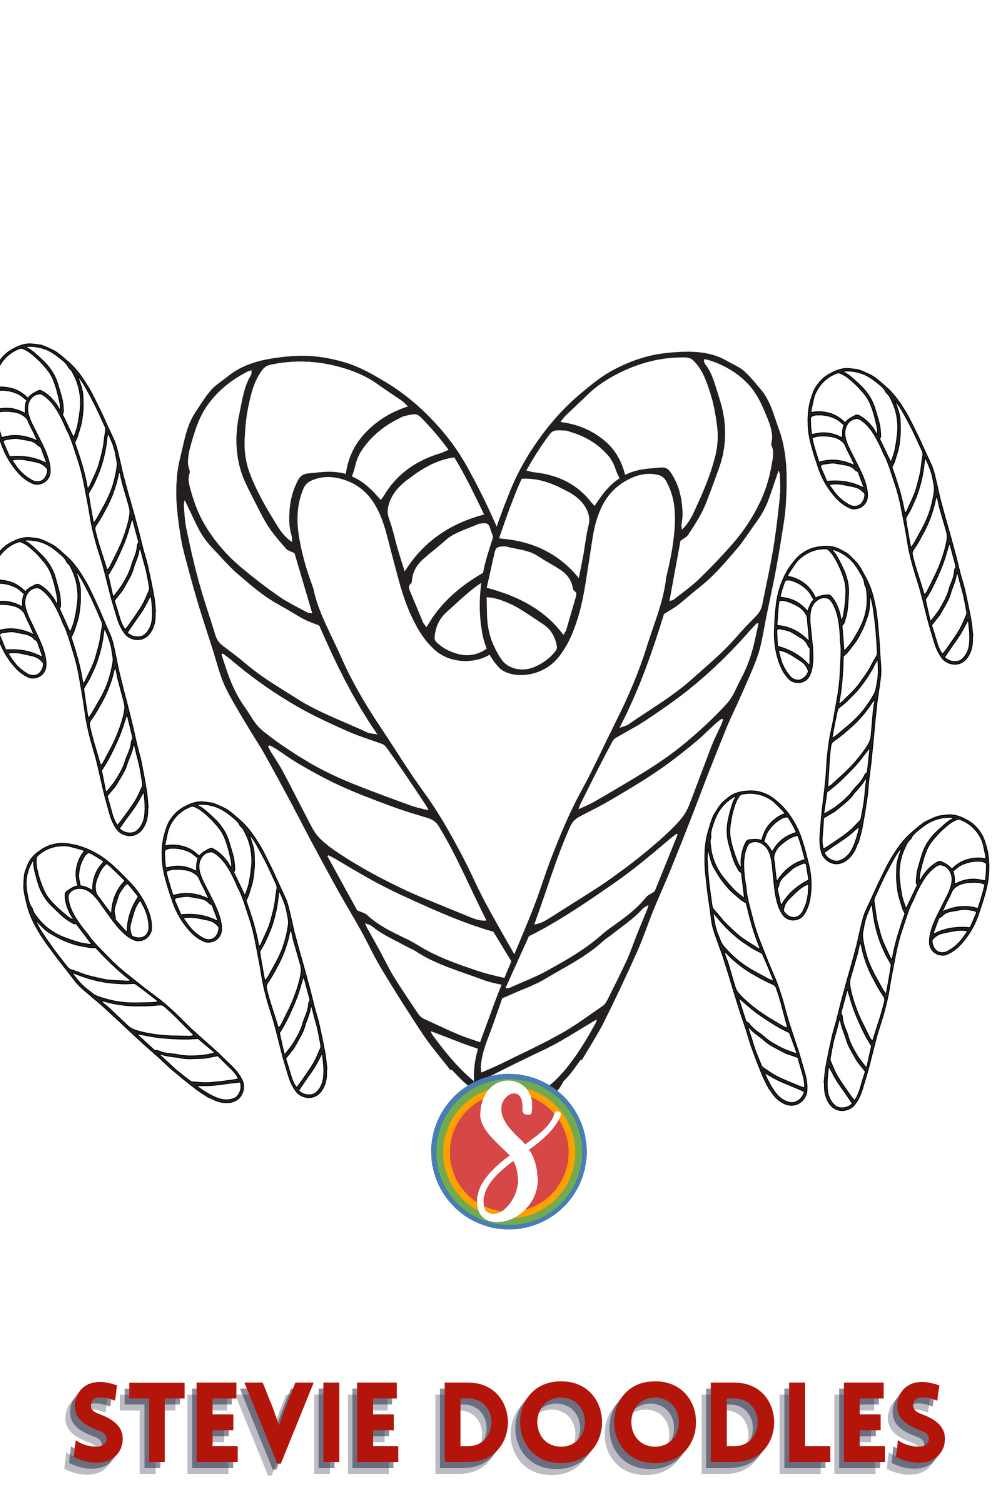 coloring page of two candy canes in a heart shape with other candy canes around